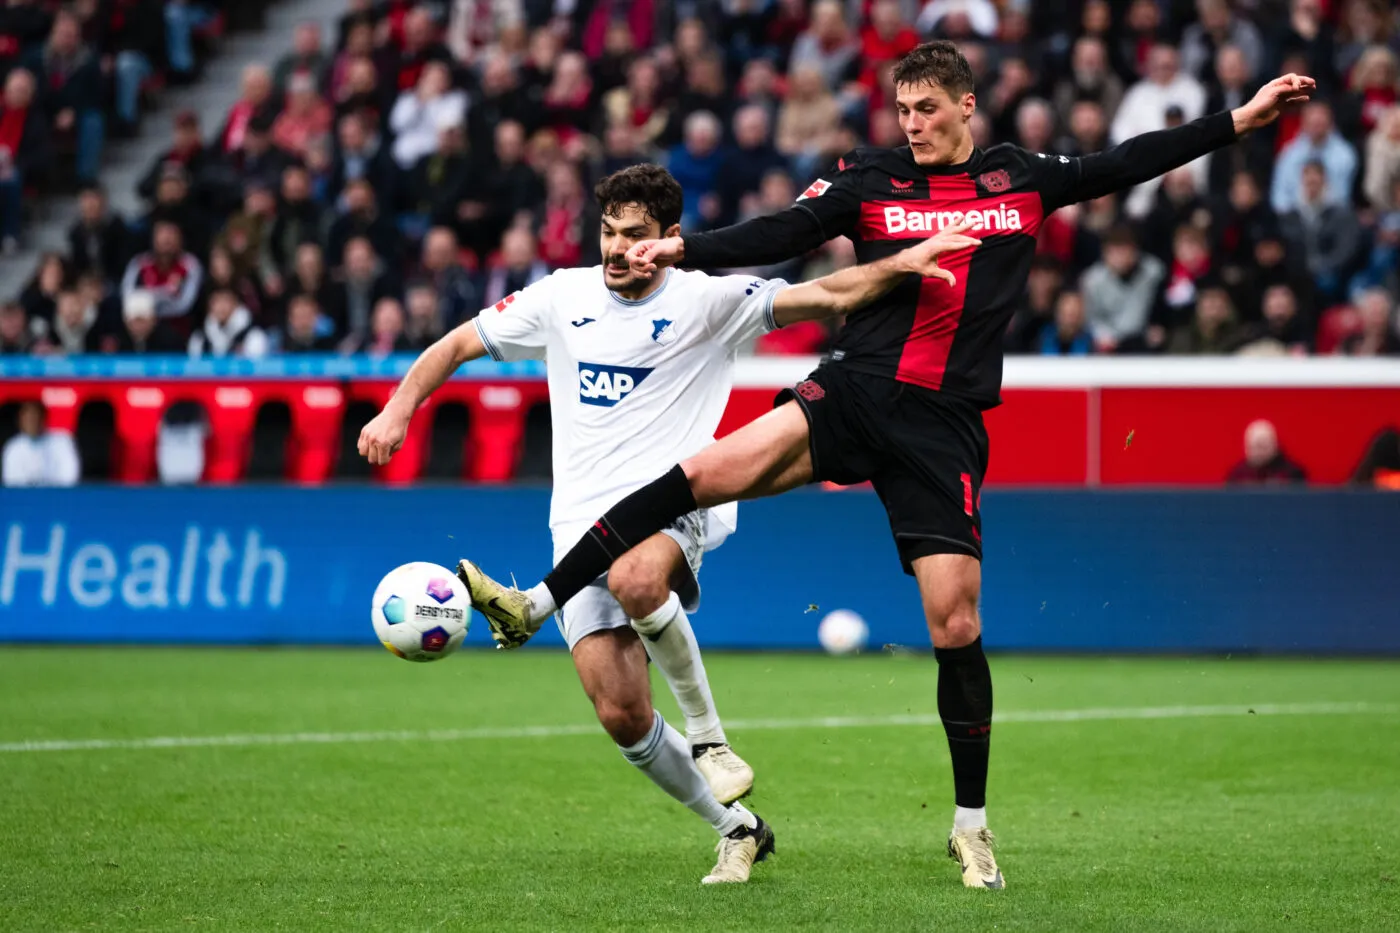 30 March 2024, North Rhine-Westphalia, Leverkusen: Soccer: Bundesliga, Bayer Leverkusen - TSG 1899 Hoffenheim, Matchday 27, BayArena. Leverkusen's Patrik Schick (r) and Hoffenheim's Ozan Kabak fight for the ball. Photo: Marius Becker/dpa - IMPORTANT NOTE: In accordance with the regulations of the DFL German Football League and the DFB German Football Association, it is prohibited to utilize or have utilized photographs taken in the stadium and/or of the match in the form of sequential images and/or video-like photo series. Photo by Icon sport   - Photo by Icon Sport